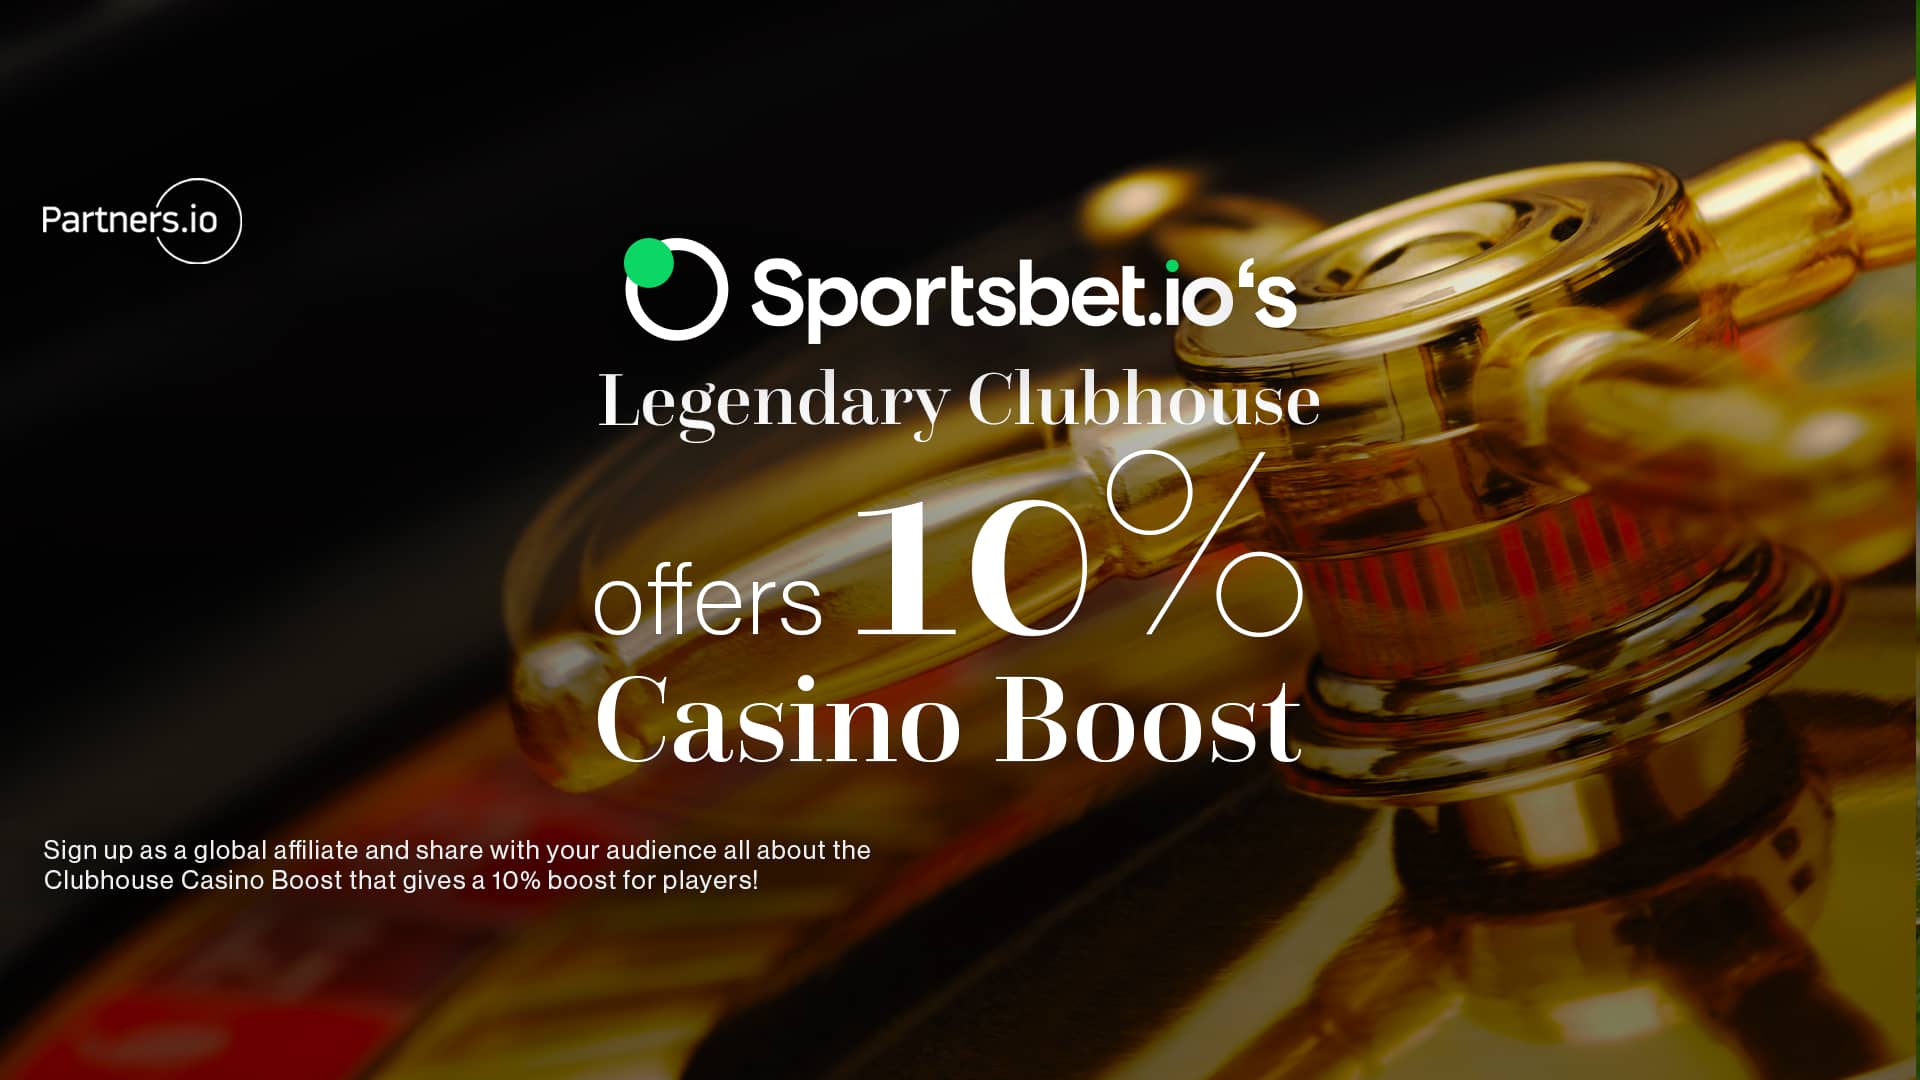 Sportsbet.io’s Legendary Clubhouse offers a 10% Casino Boost